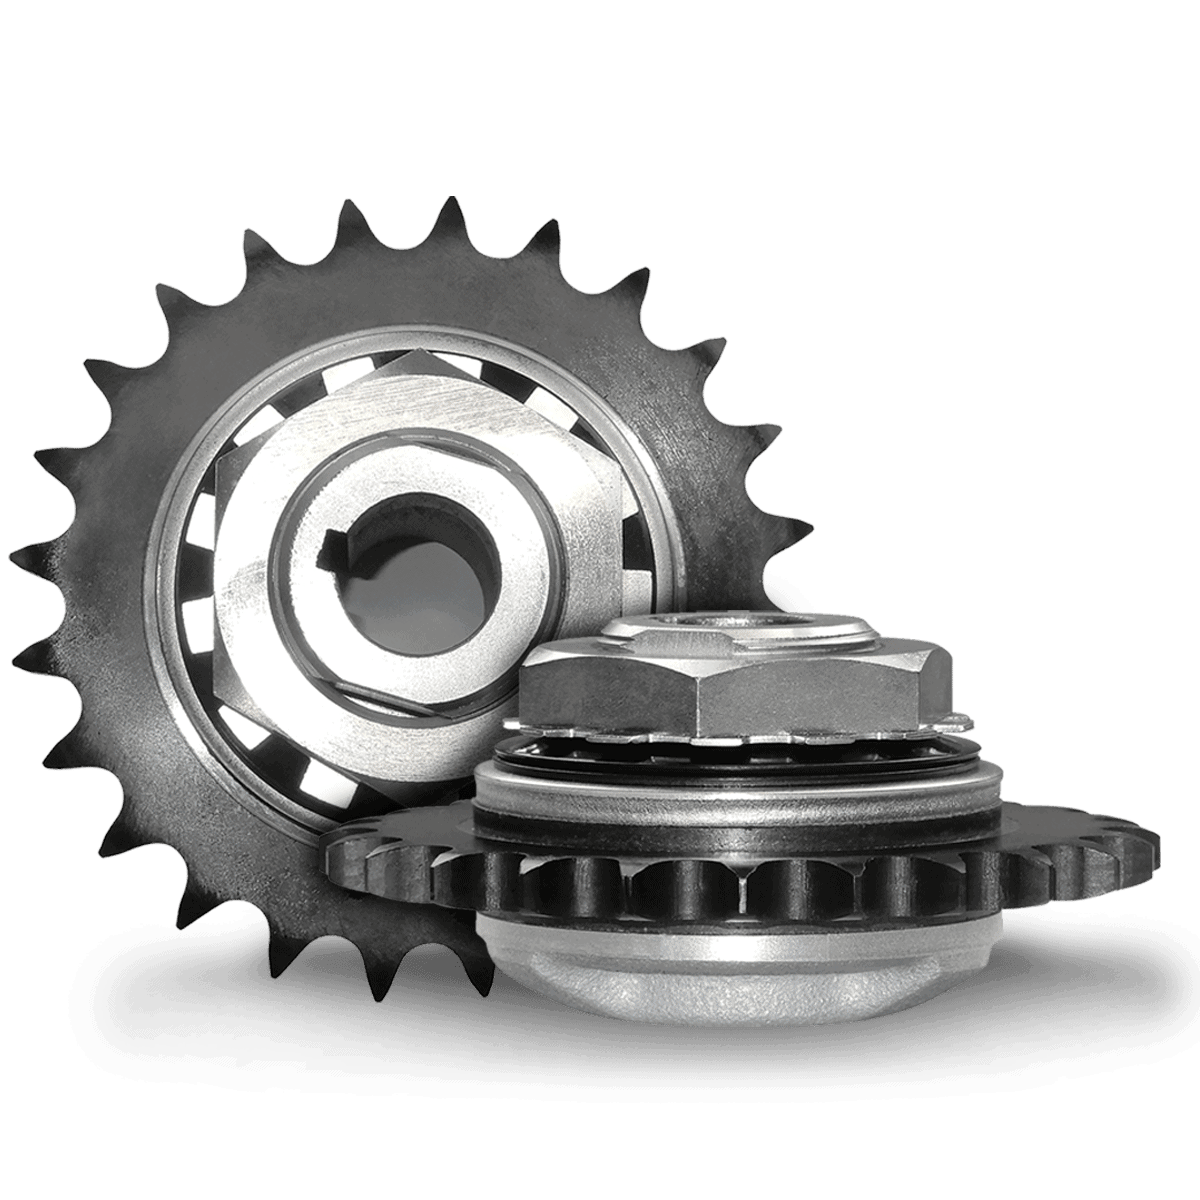 Torque Limiter Sprockets Offer Maximum Protection from Torque Overload